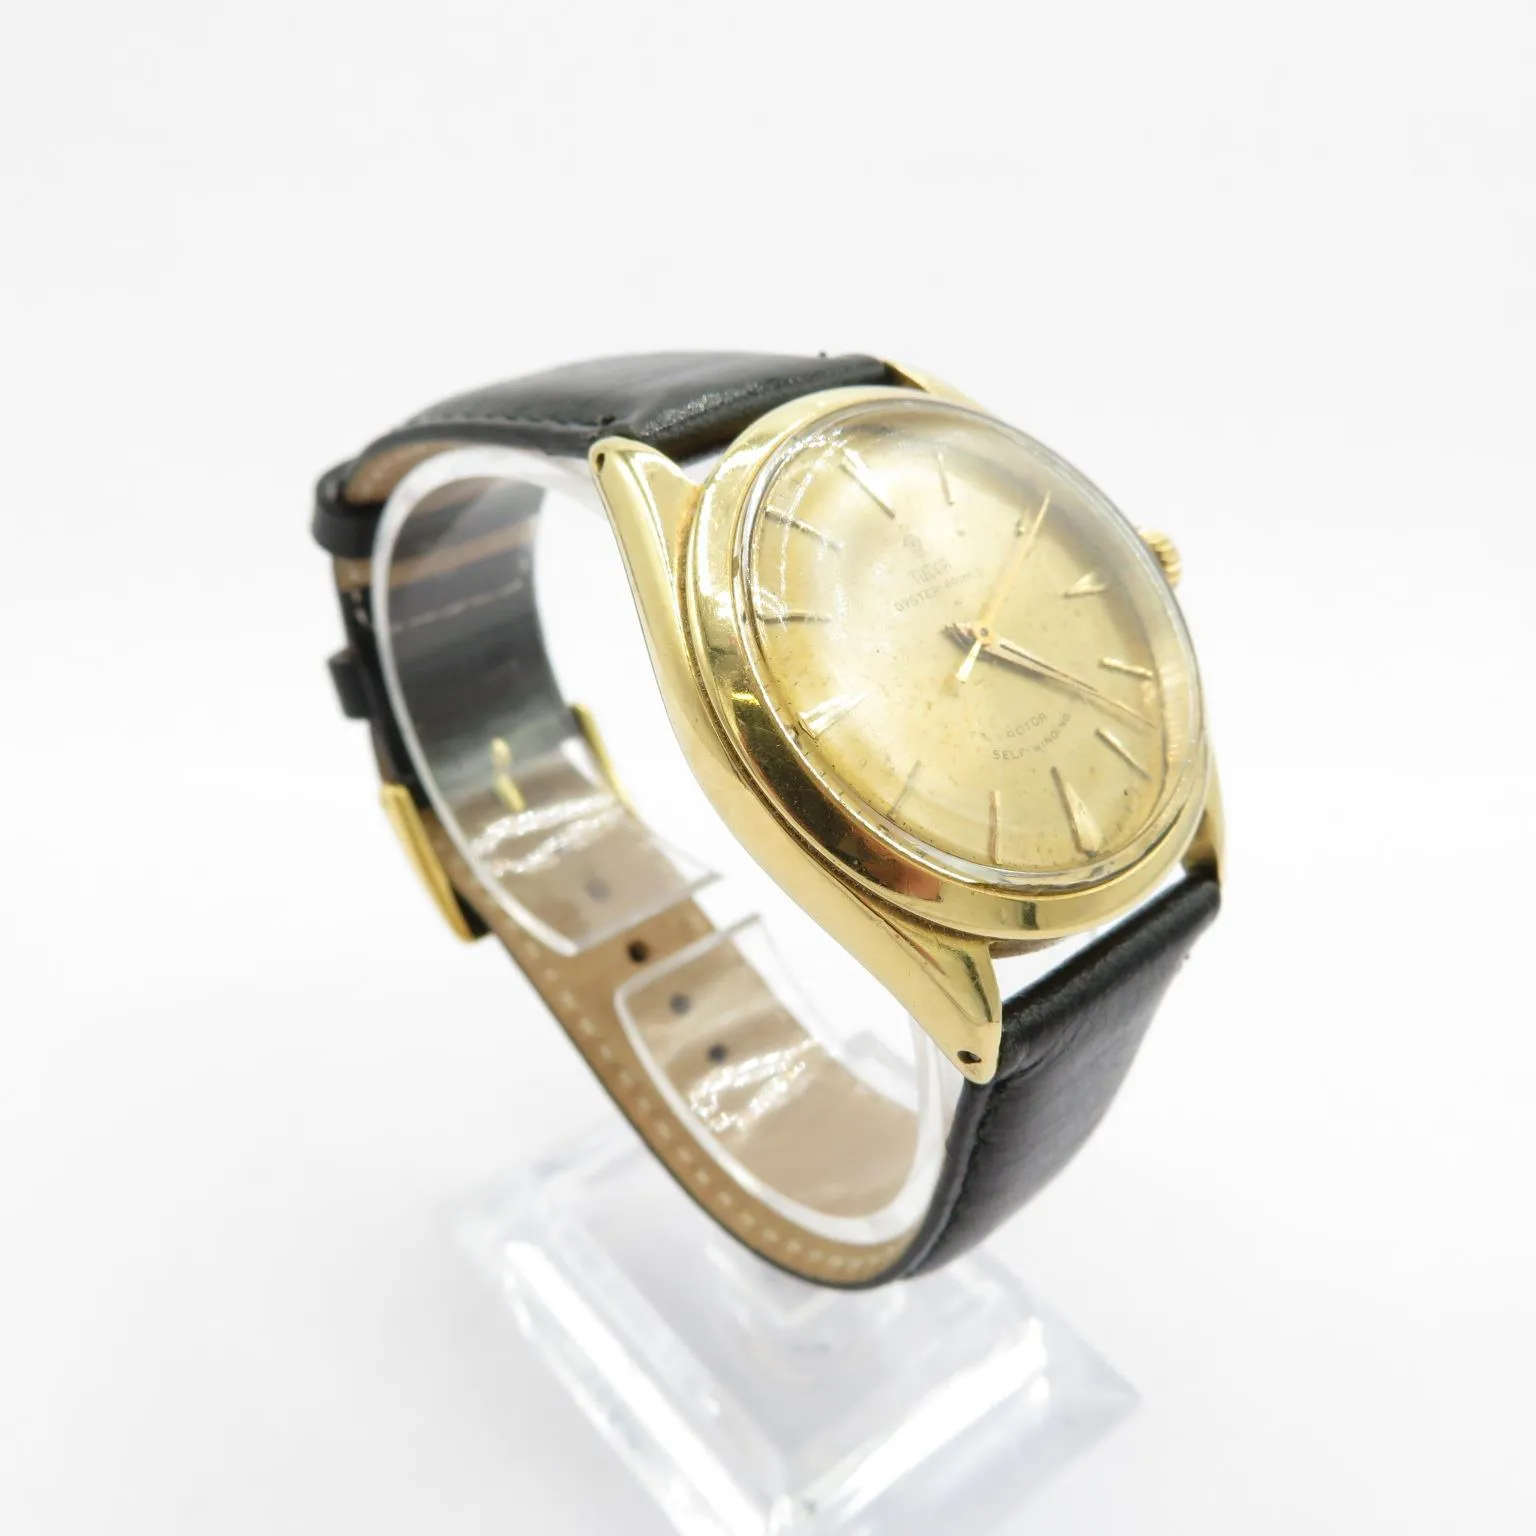 Tudor Oyster Prince 7965 nullmm Yellow gold 3